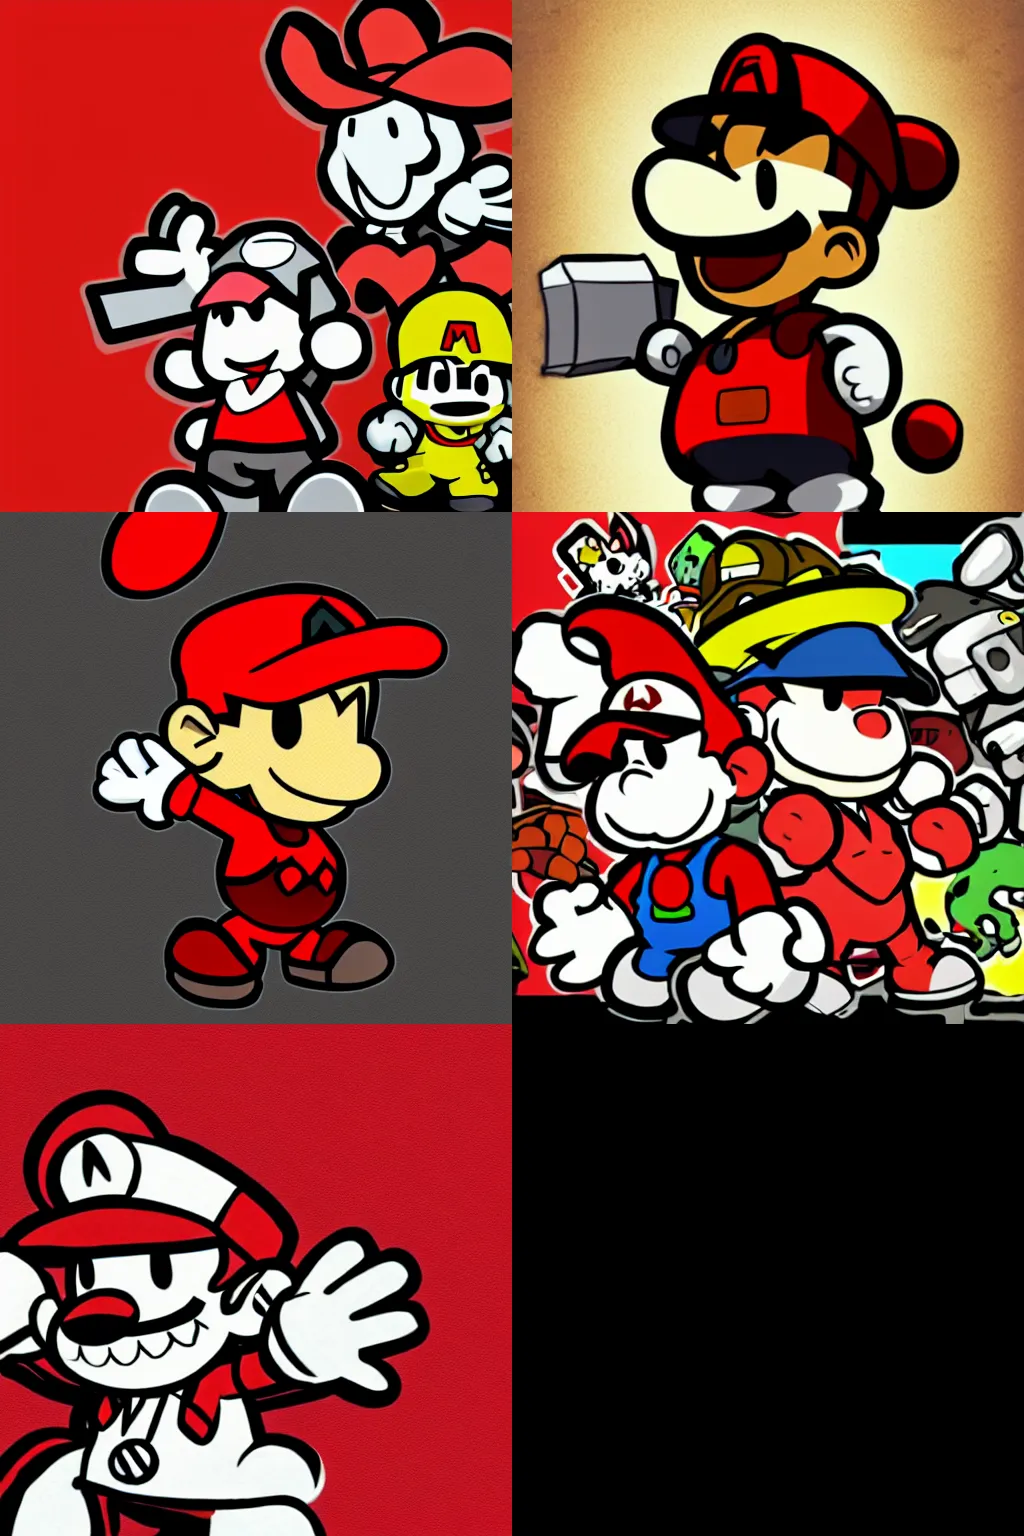 Prompt: fan artwork of paper mario, videogame art, edgy and bold artstyle, limited color palette, black and red tones